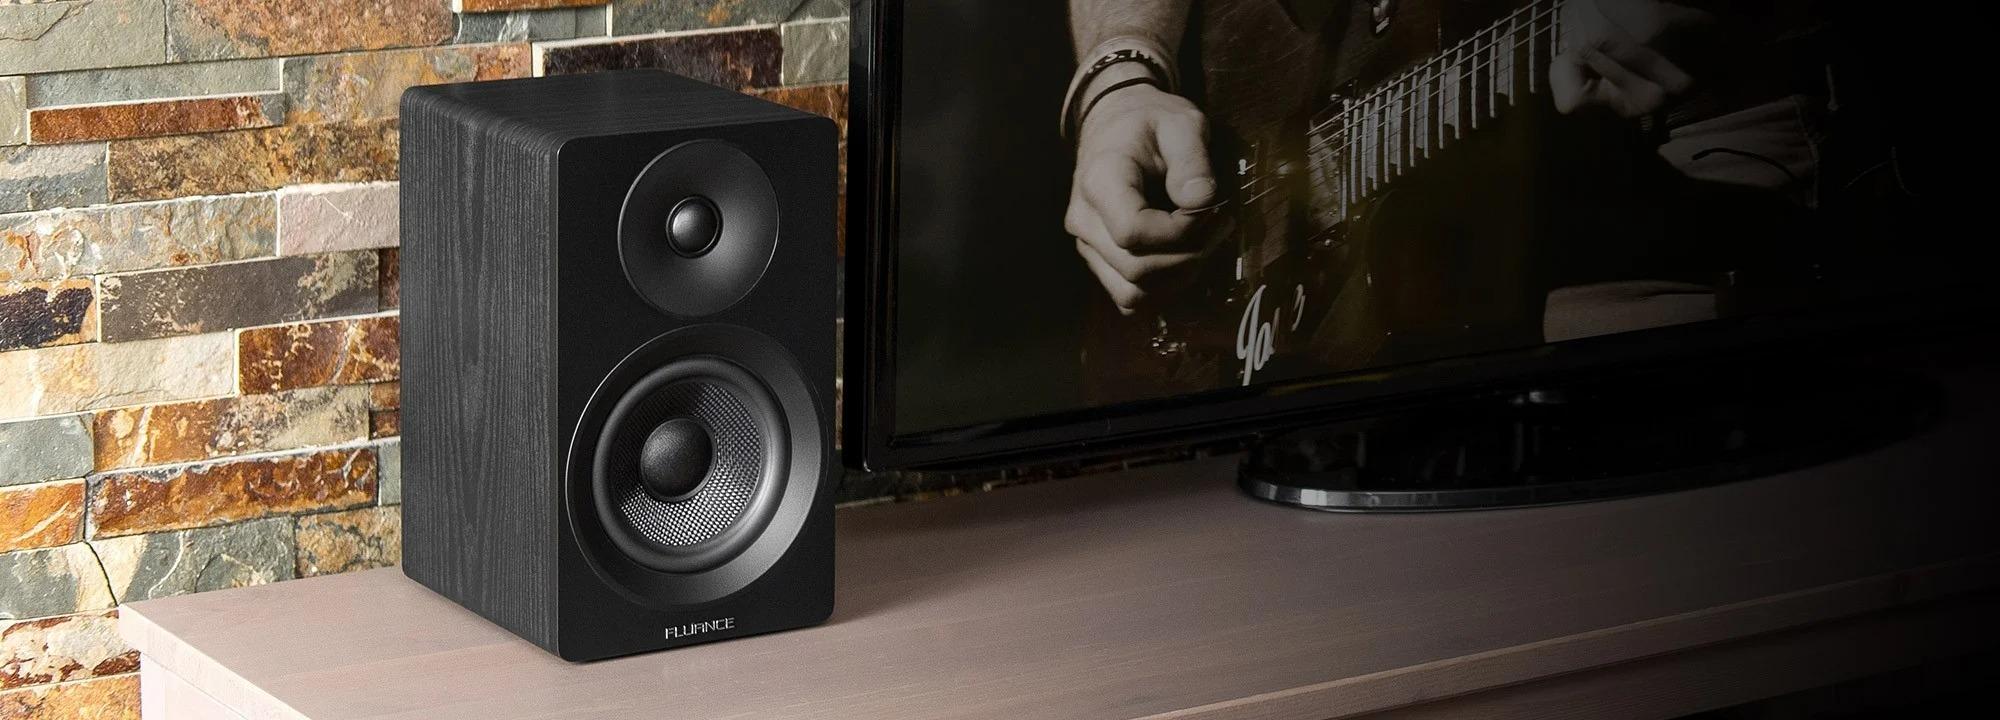 The Ai41 Powered Bookshelf Speakers offer great sound and connectivity options that should satisfy most listeners.